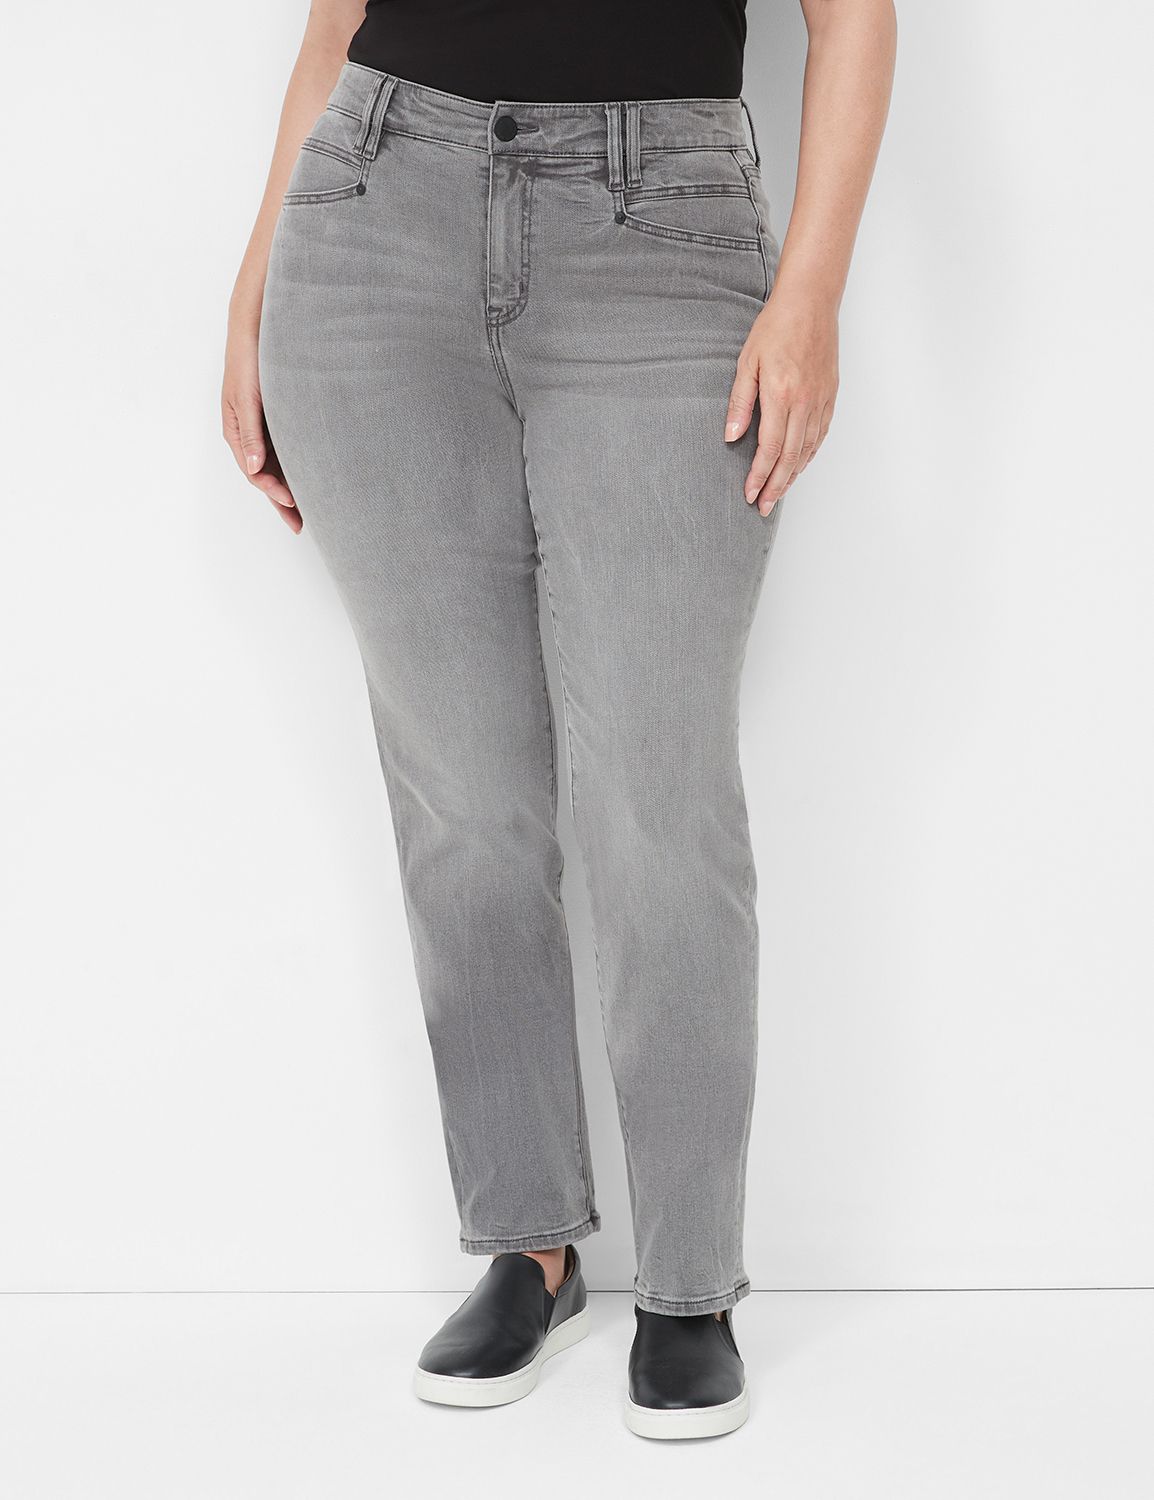 Democracy Ab Solution Colored Straight Leg Booty Lift Jeans Tan